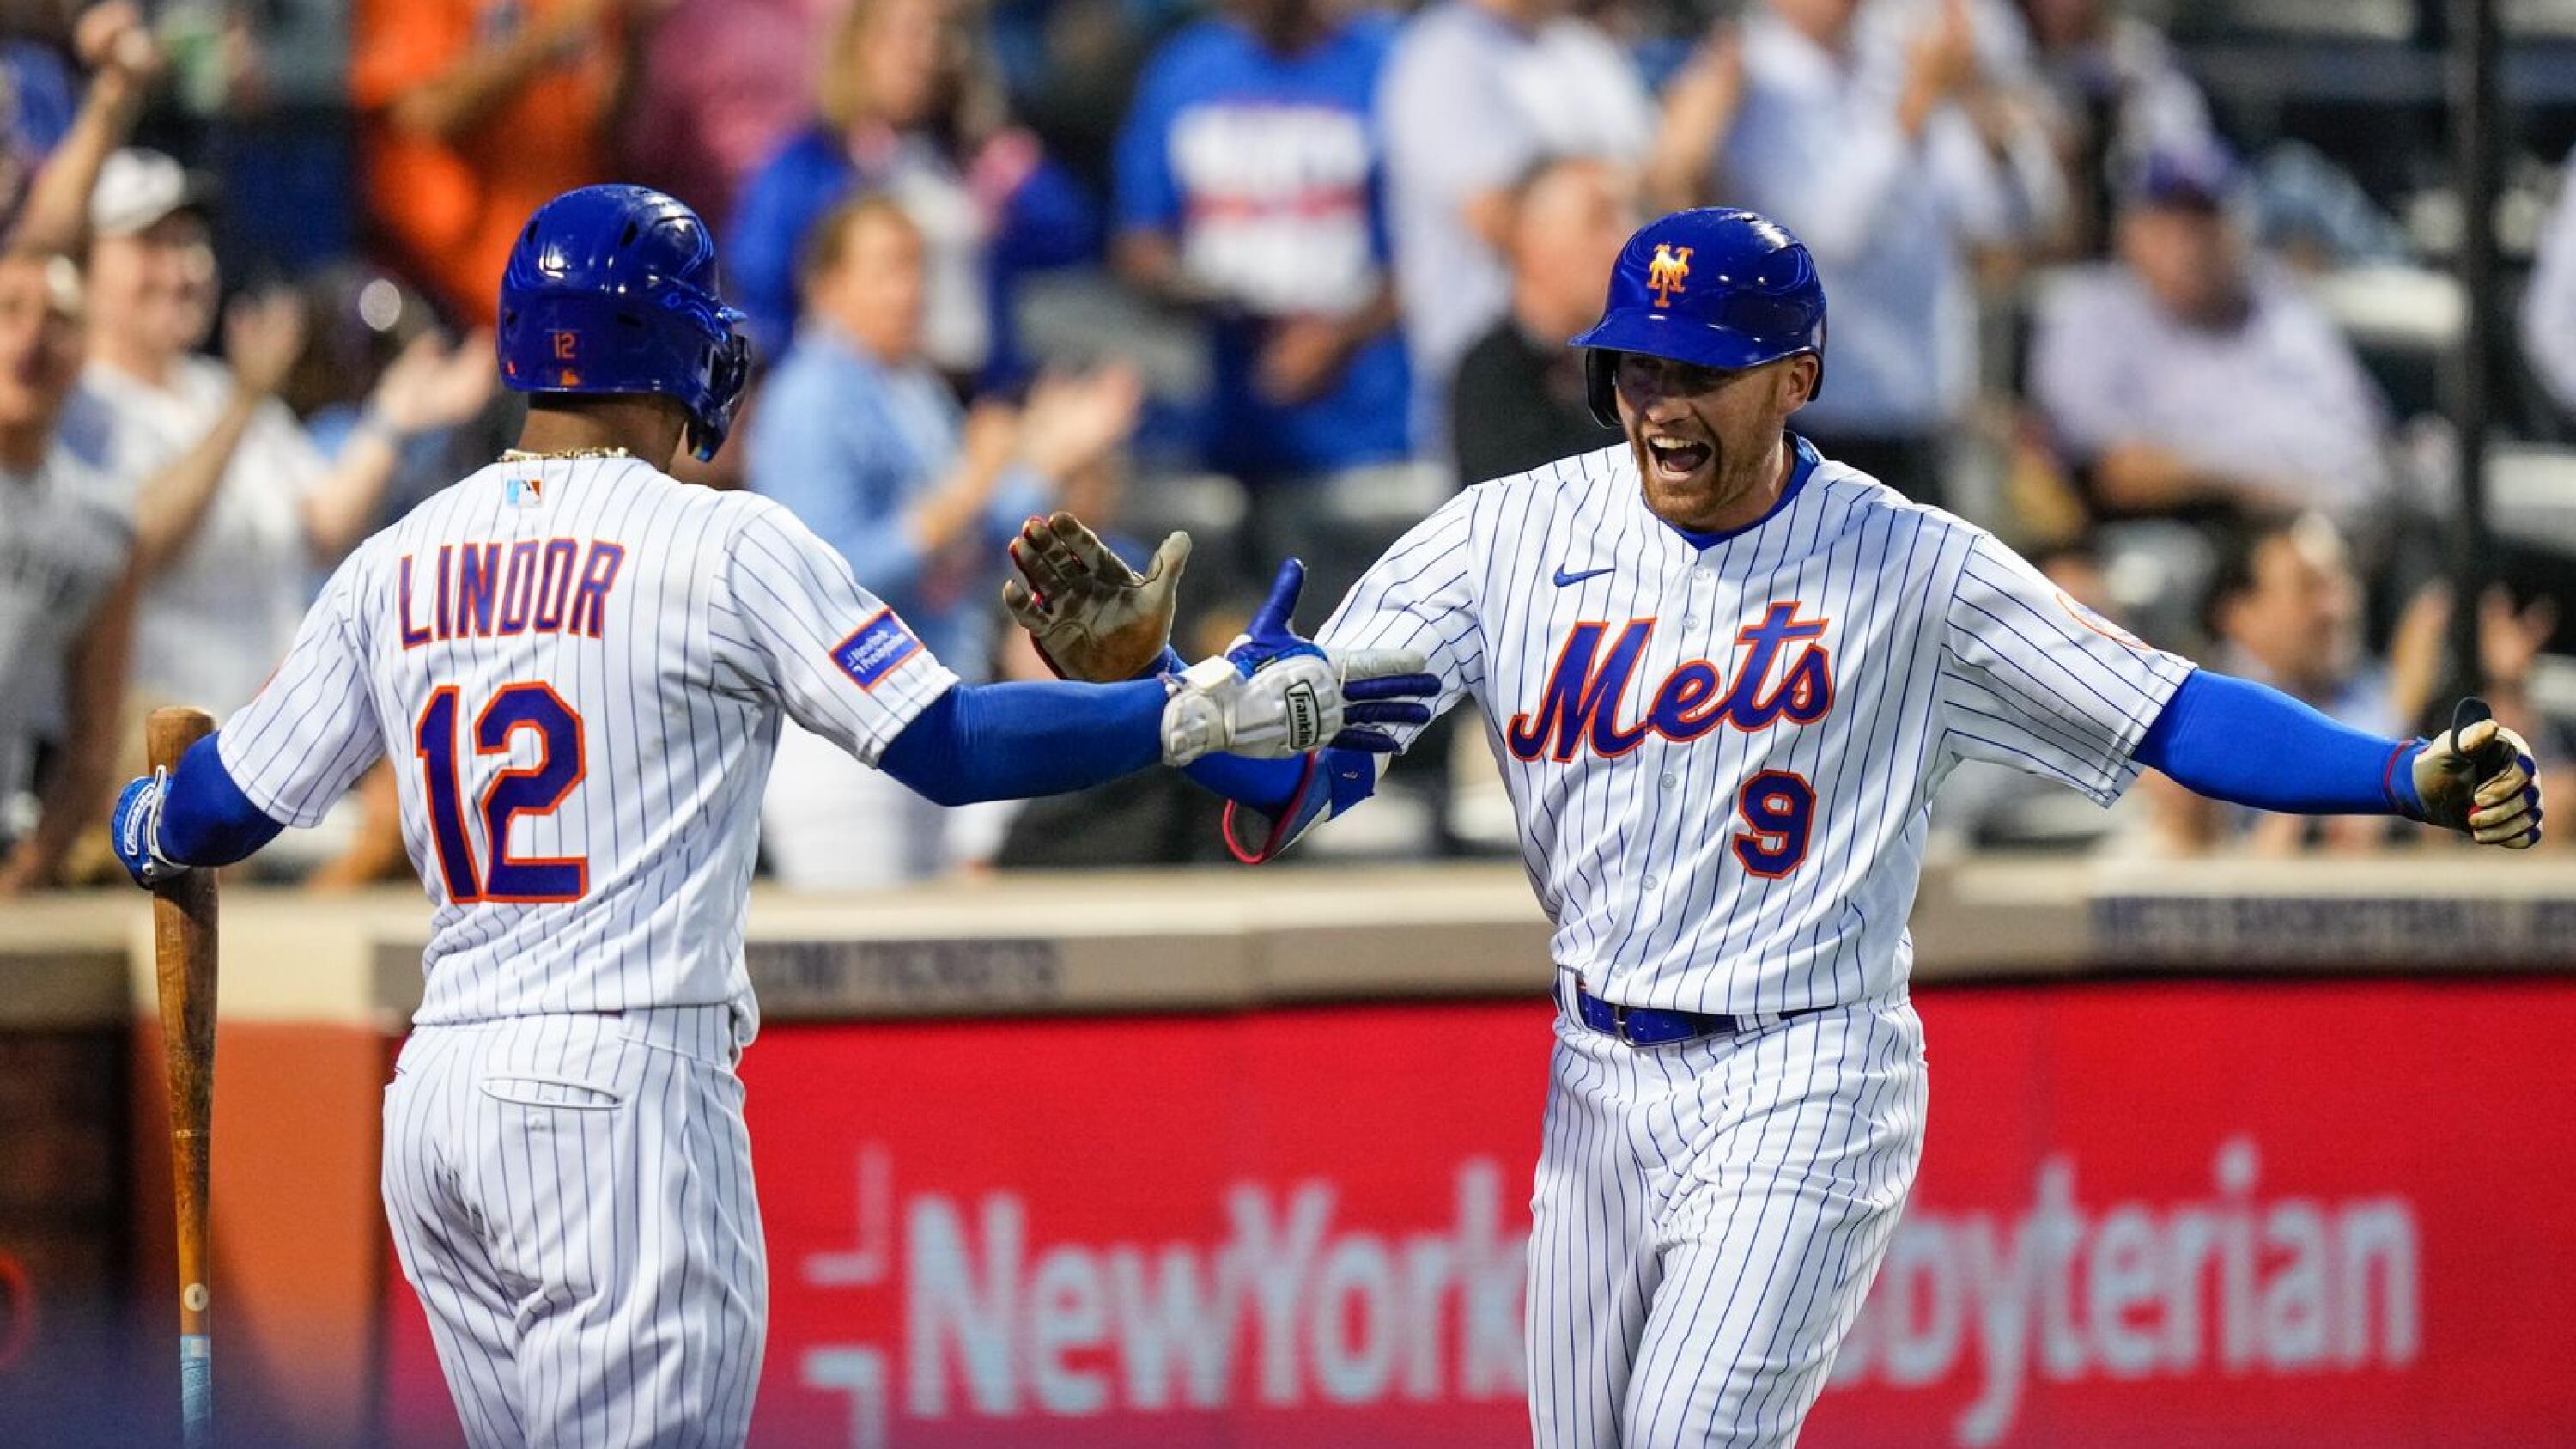 Peterson, Nimmo lift struggling Mets past Brewers ahead of owner